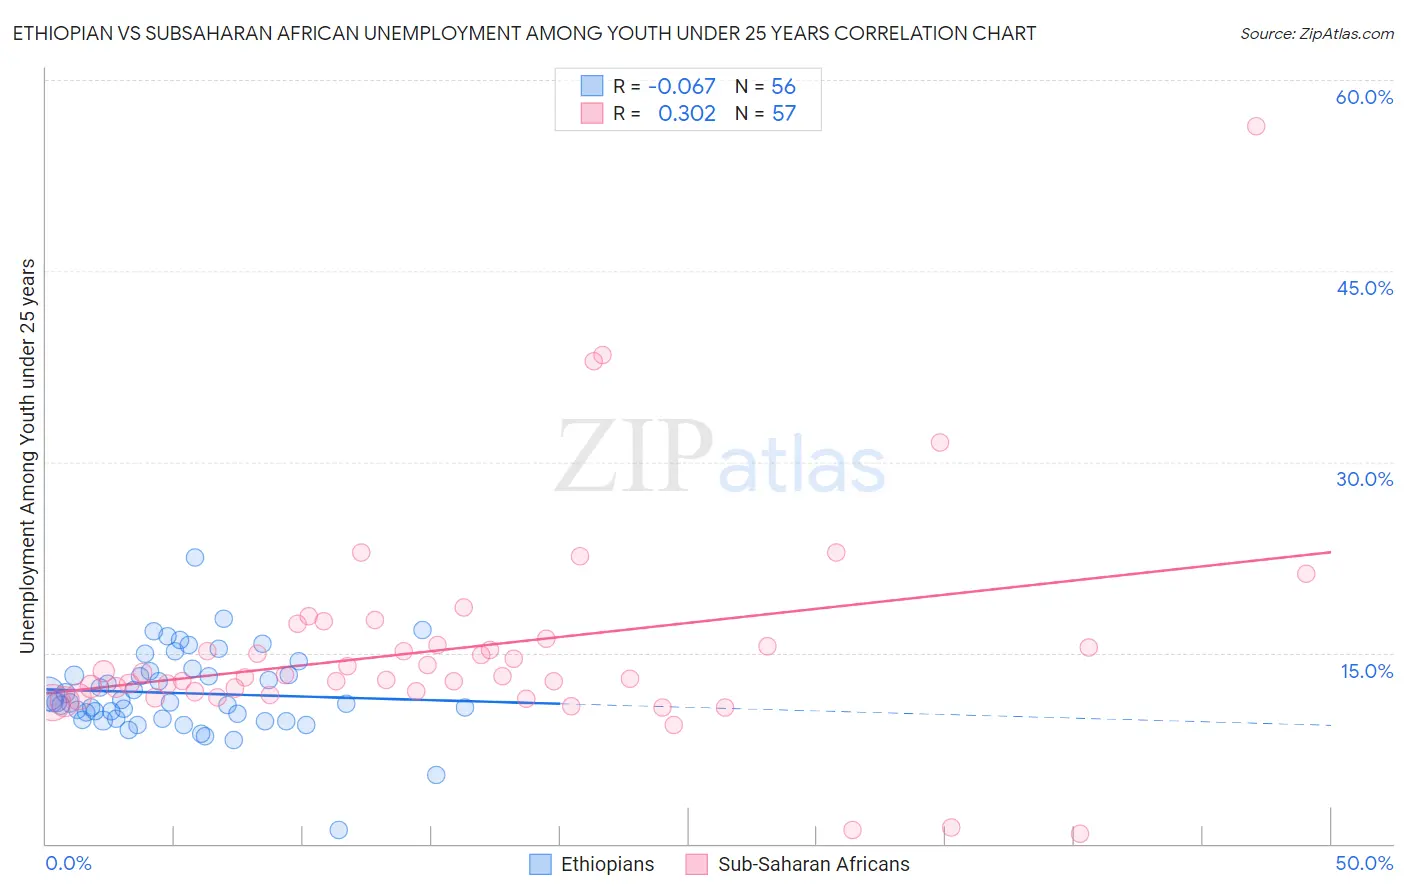 Ethiopian vs Subsaharan African Unemployment Among Youth under 25 years